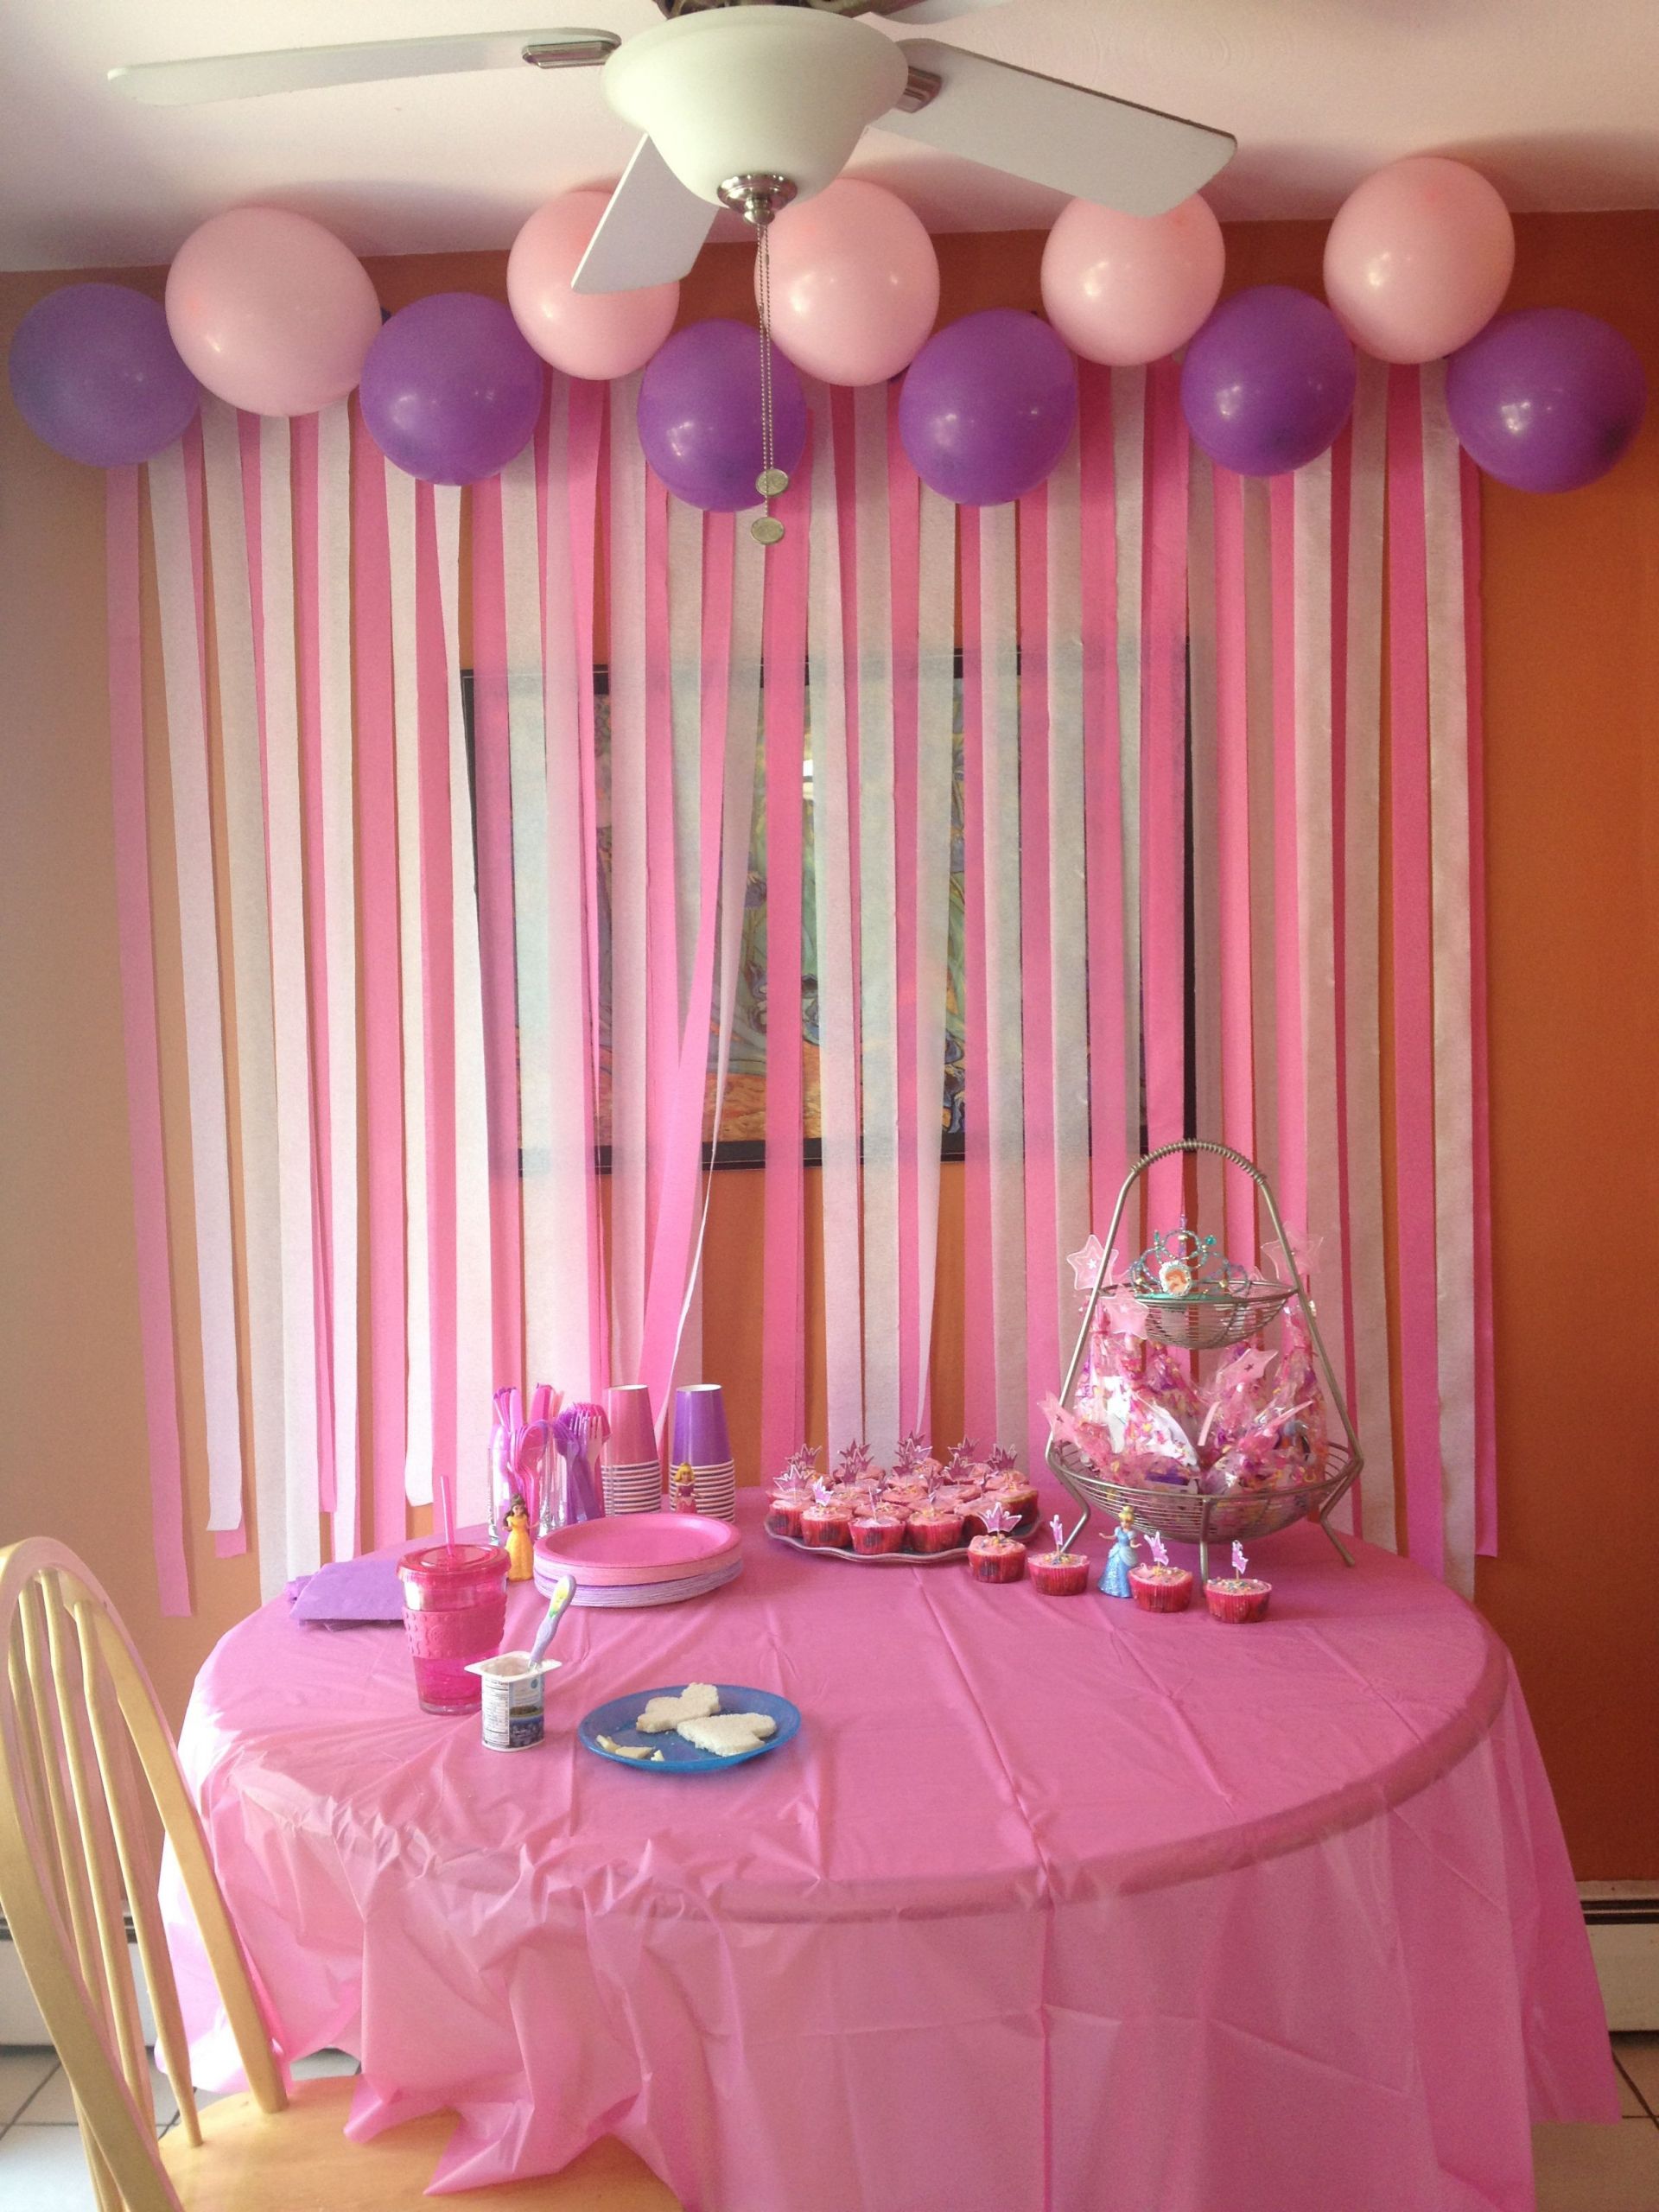 Streamer Decoration Ideas For Birthday Party
 DIY birthday party decorations love the streamers on the